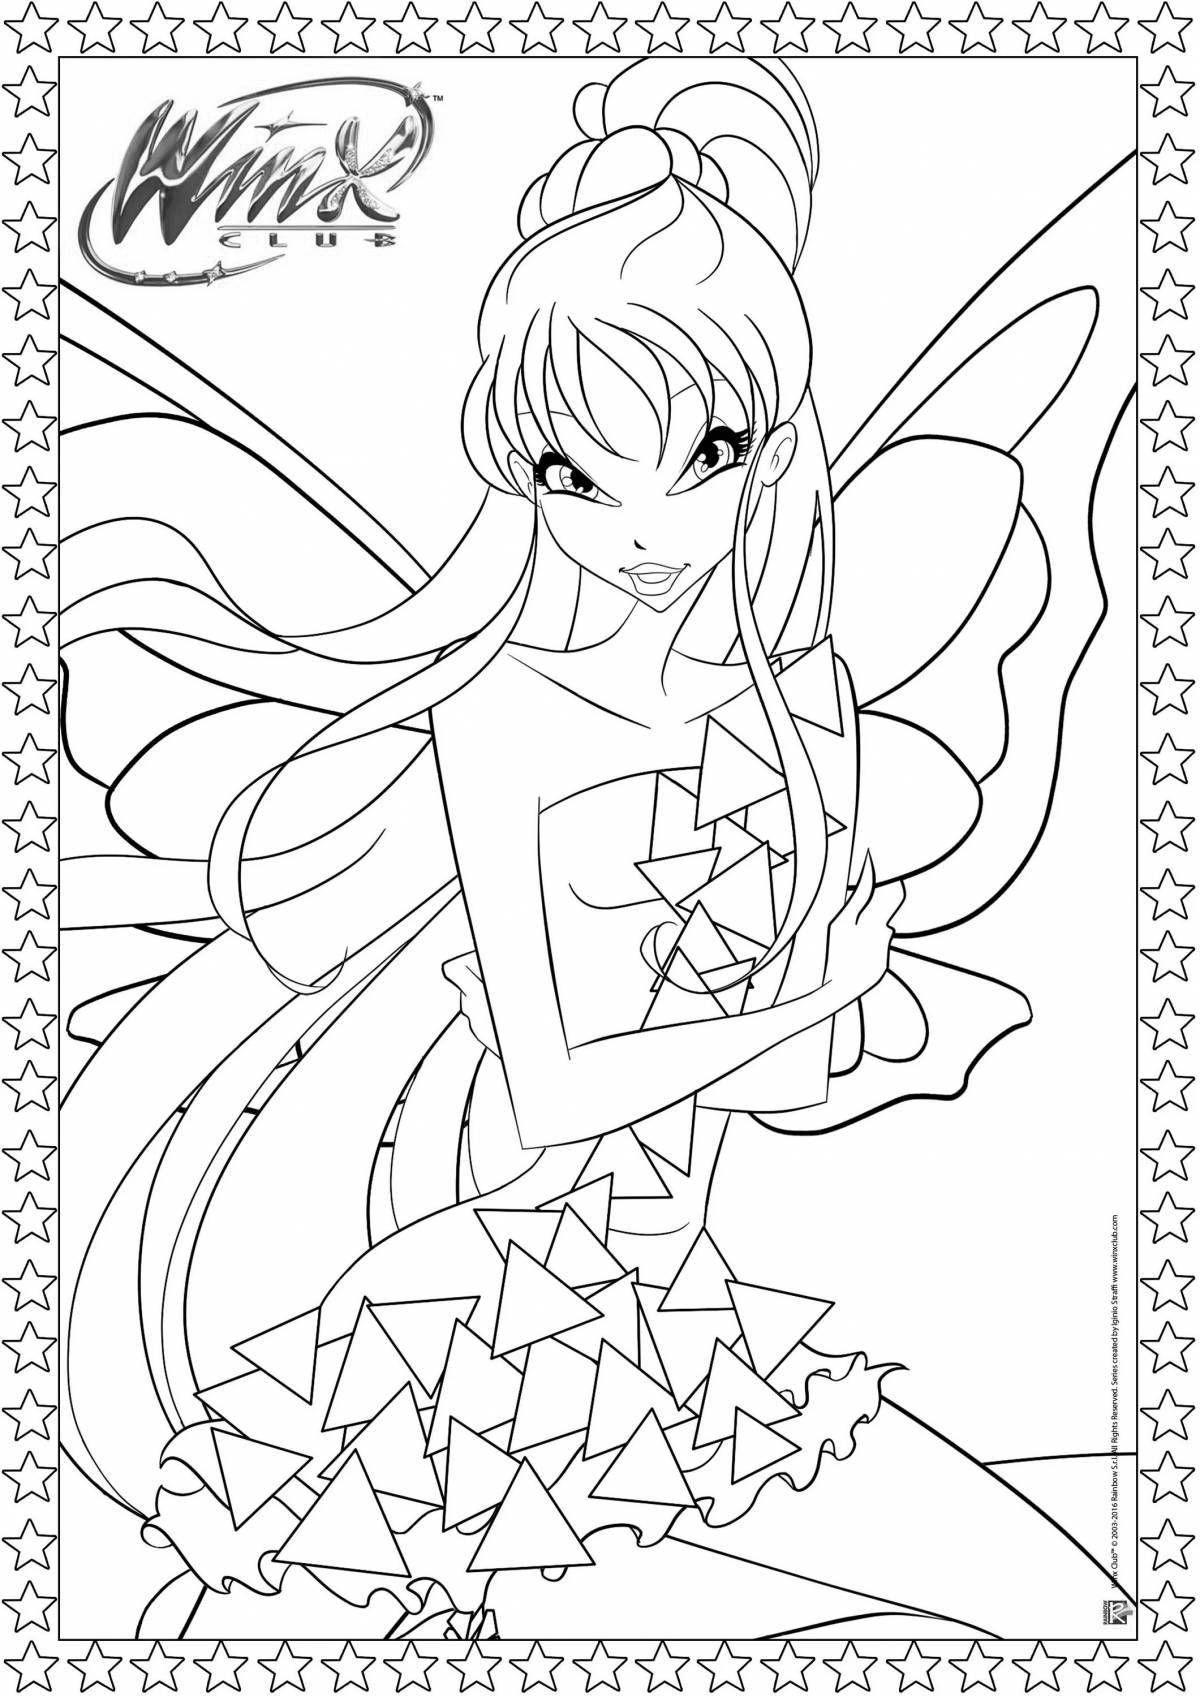 Playful tynix winx coloring page